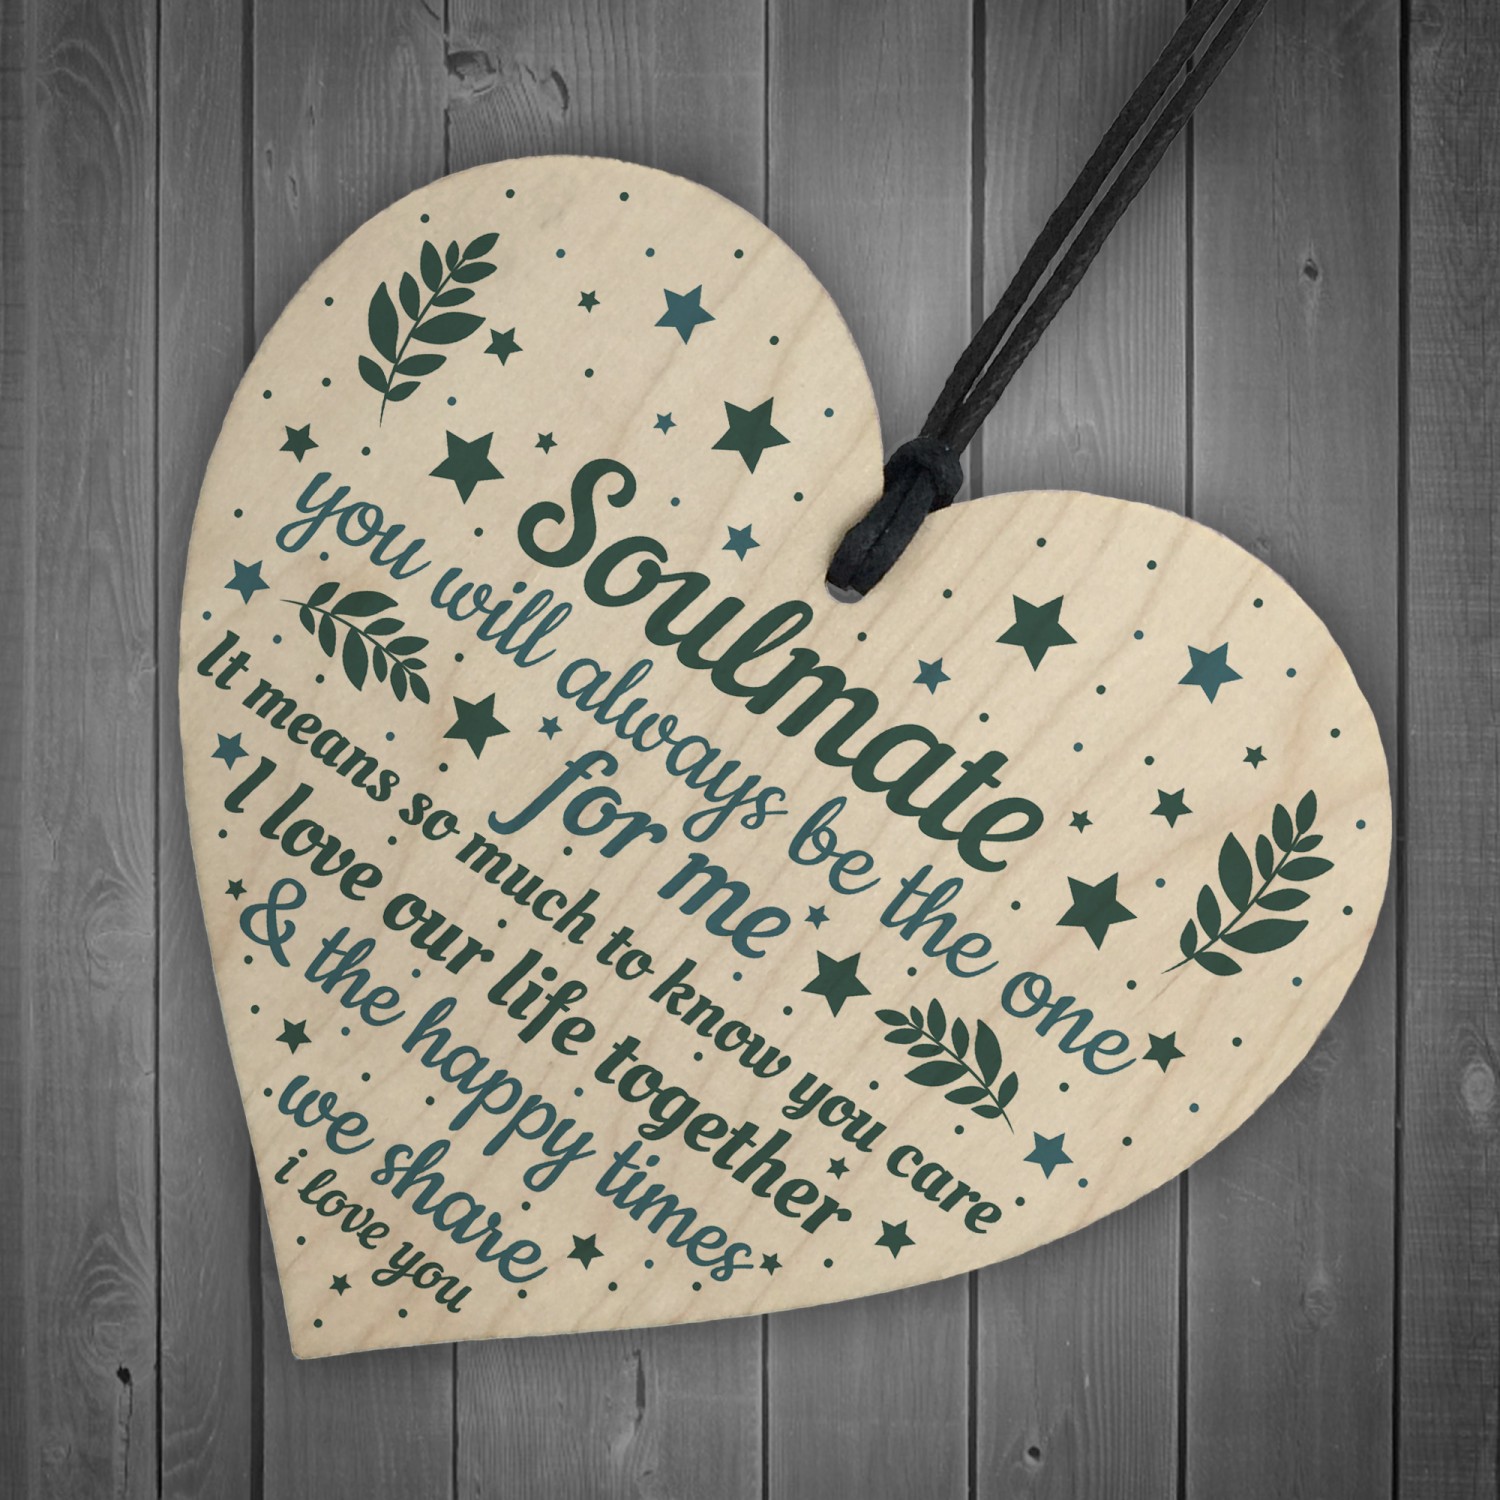 Soulmate Gifts Wood Heart Valentines Day Gift Anniversary Soulmate Birthday Xmas